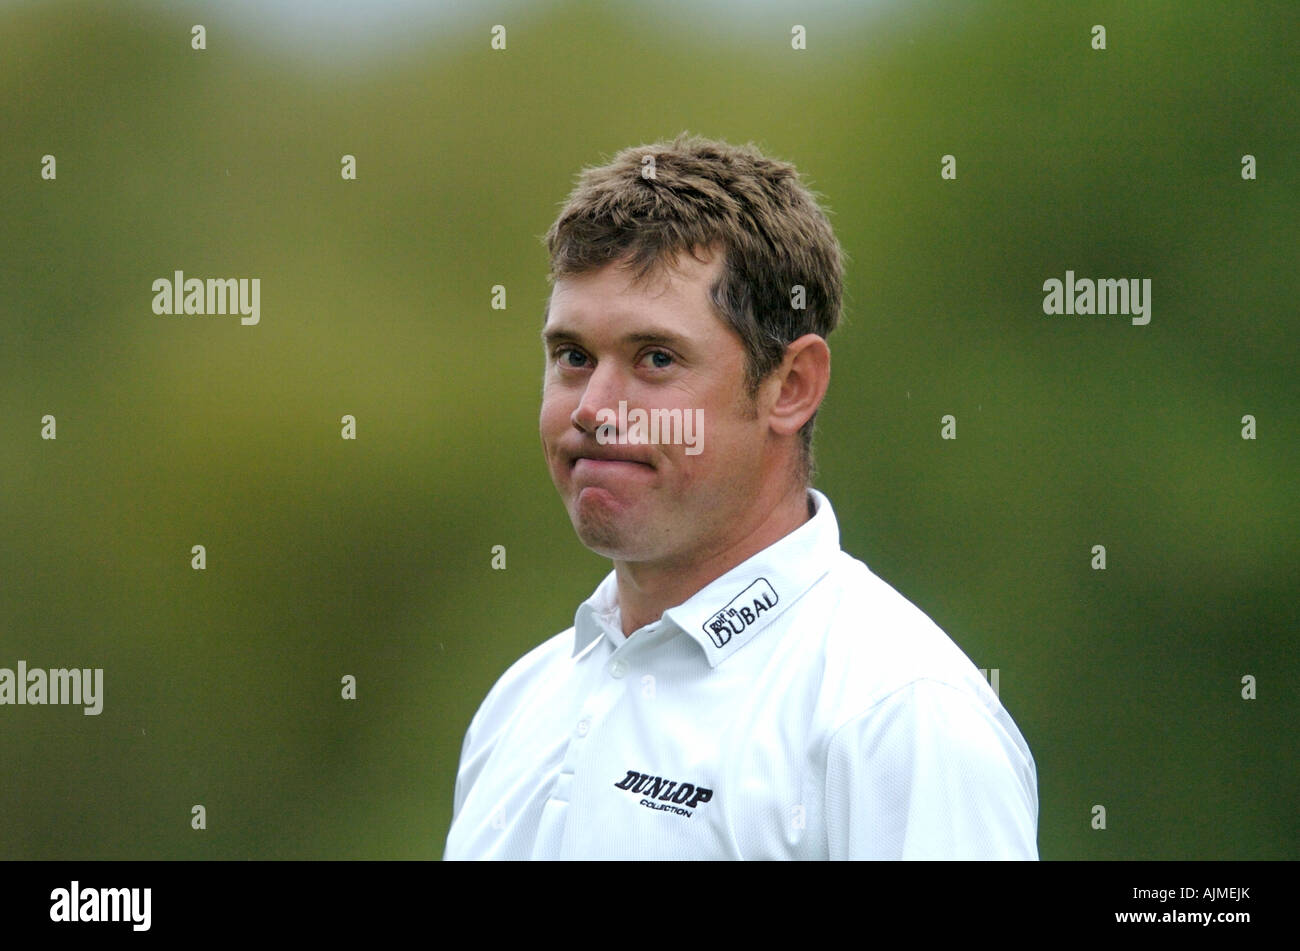 Lee Westwood during the Quinn Direct British Masters Stock Photo Alamy